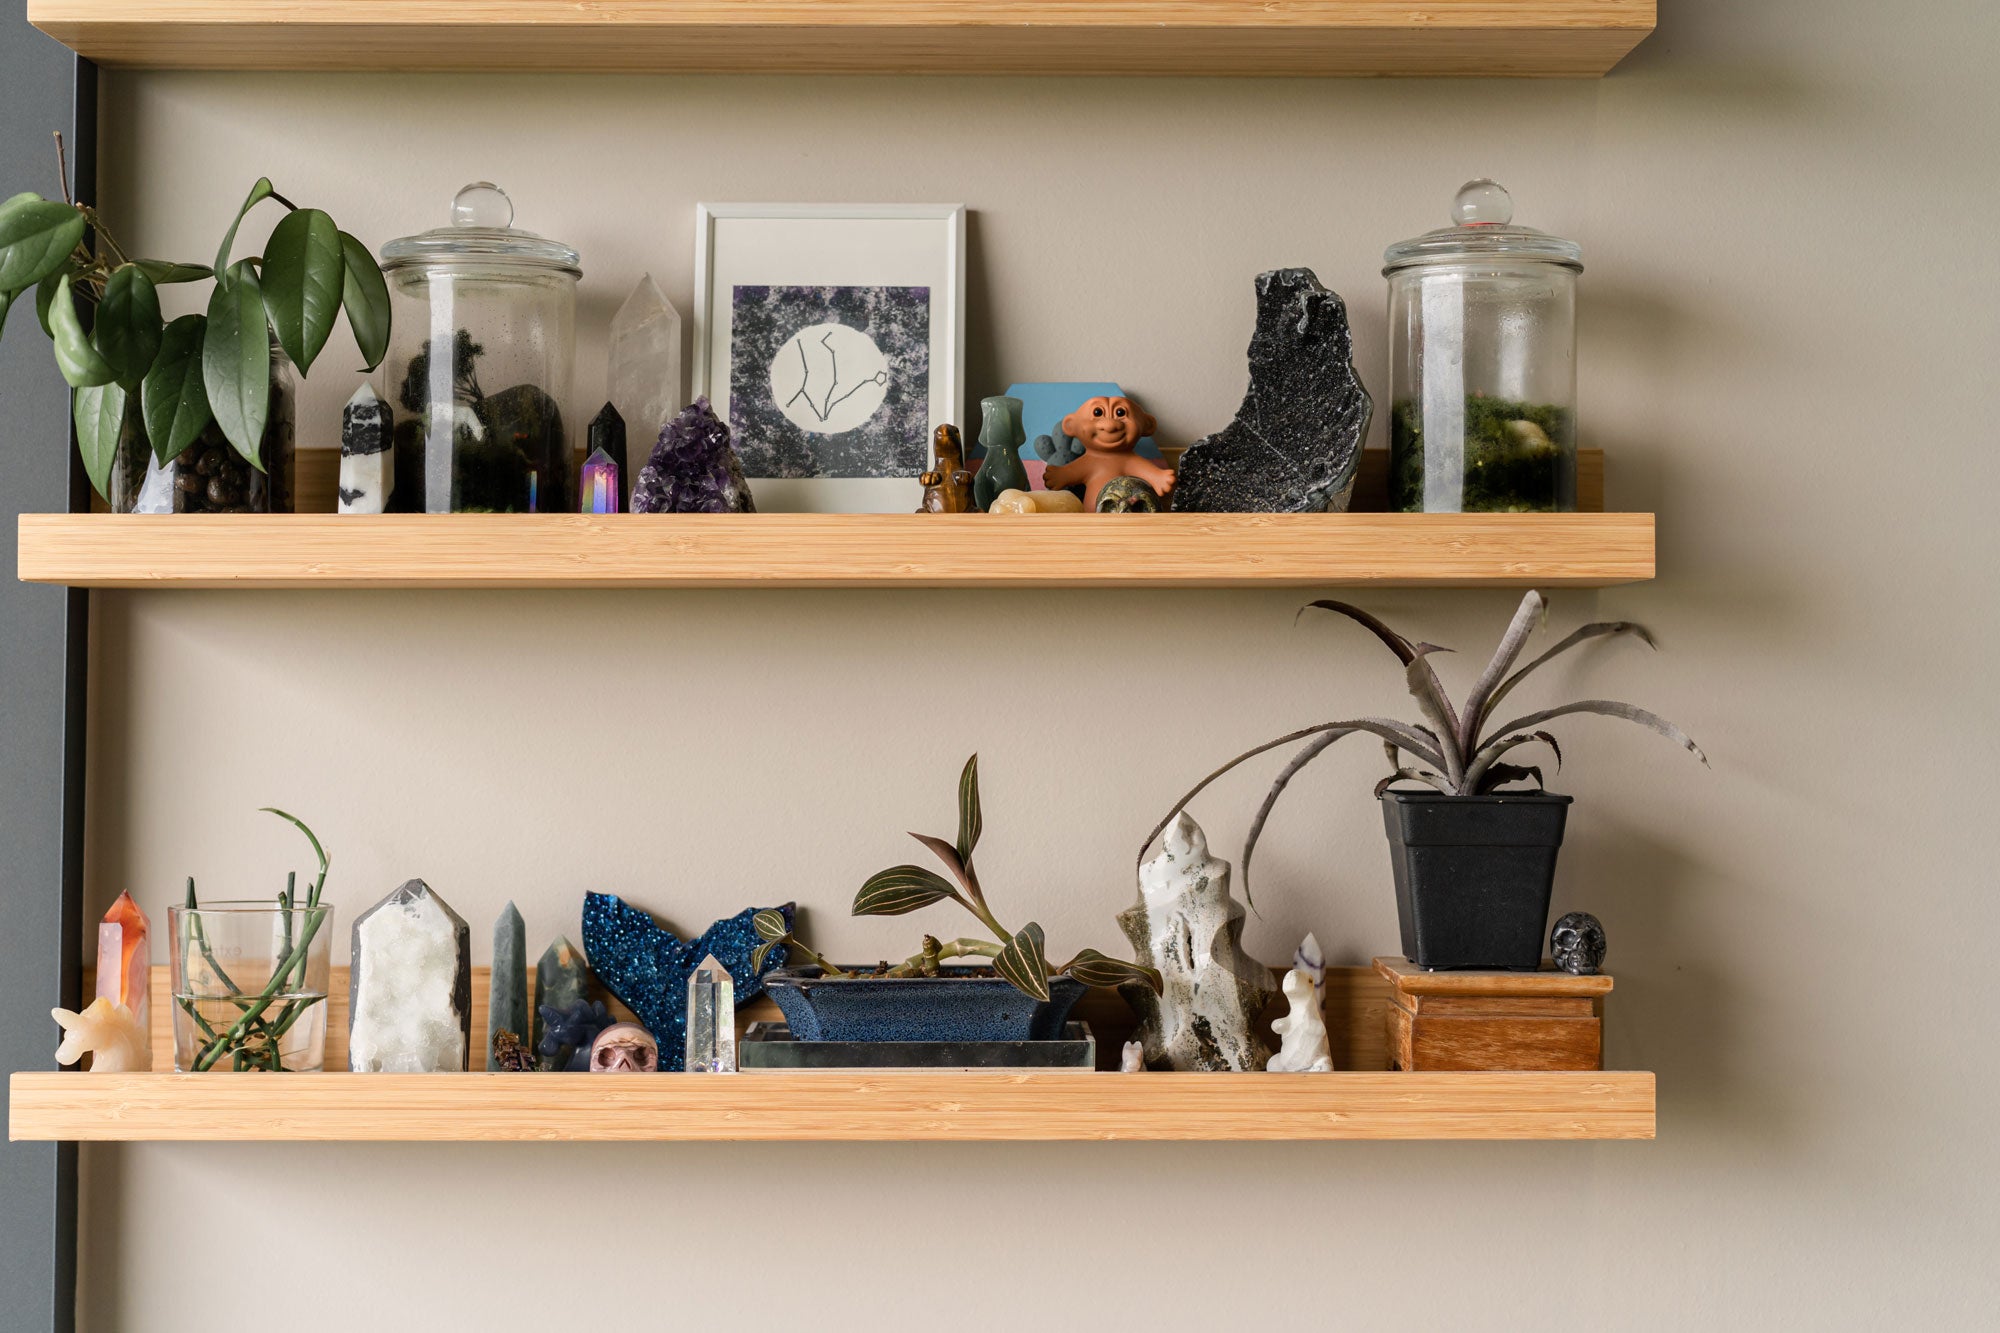 wooden shelf displaying rare plants and crystals__Sojao_house_to_home